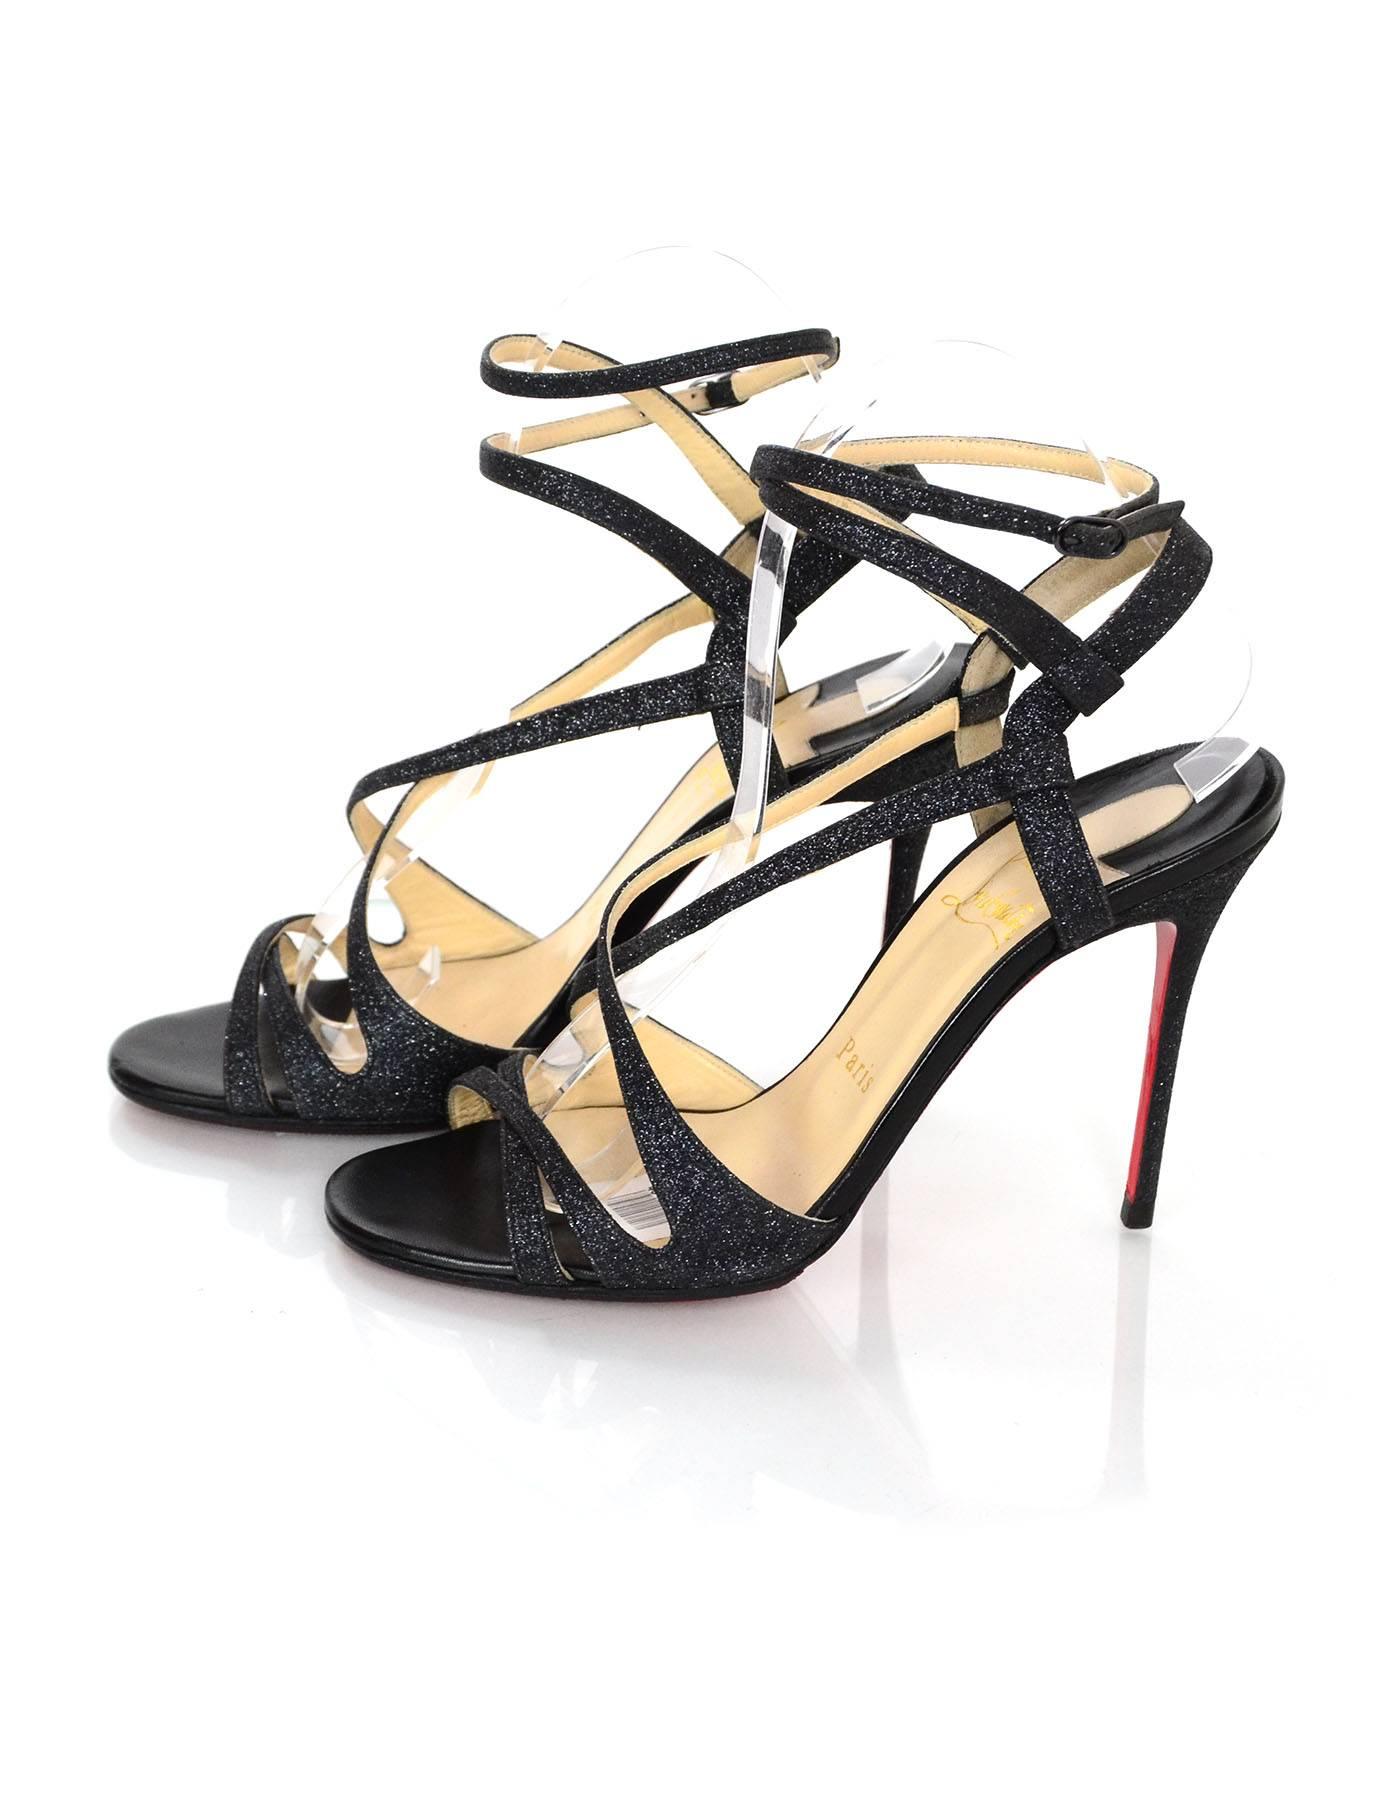 Christian Louboutin Charcoal Glitter Audrey Sandals 

Made In: Italy
Color: Charcoal
Materials: Glitter covered leather
Closure/Opening: ankle wrap strap with buckle and notch closure
Sole Stamp: Christian Louboutin Made in Italy 37
Retail